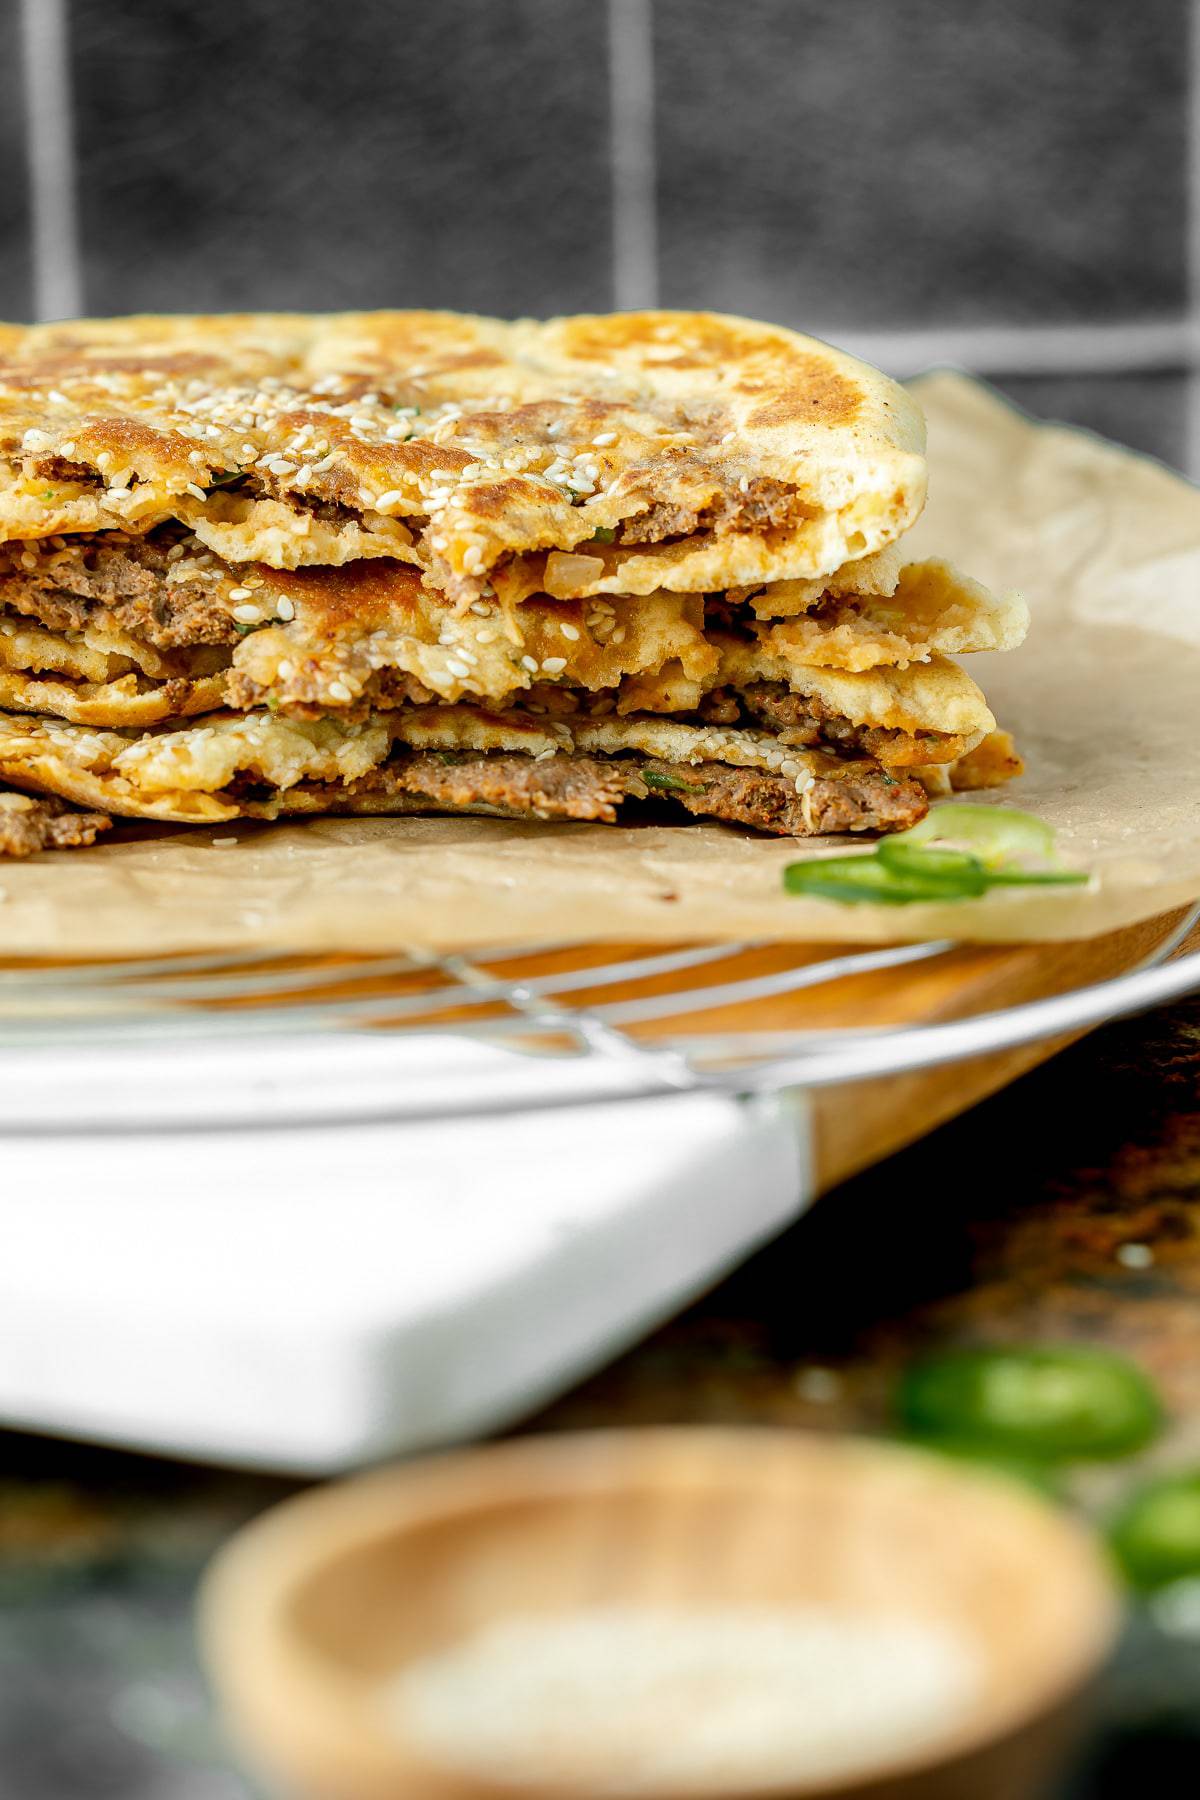 Keema naan cut in half and stacked, served on a serving board.